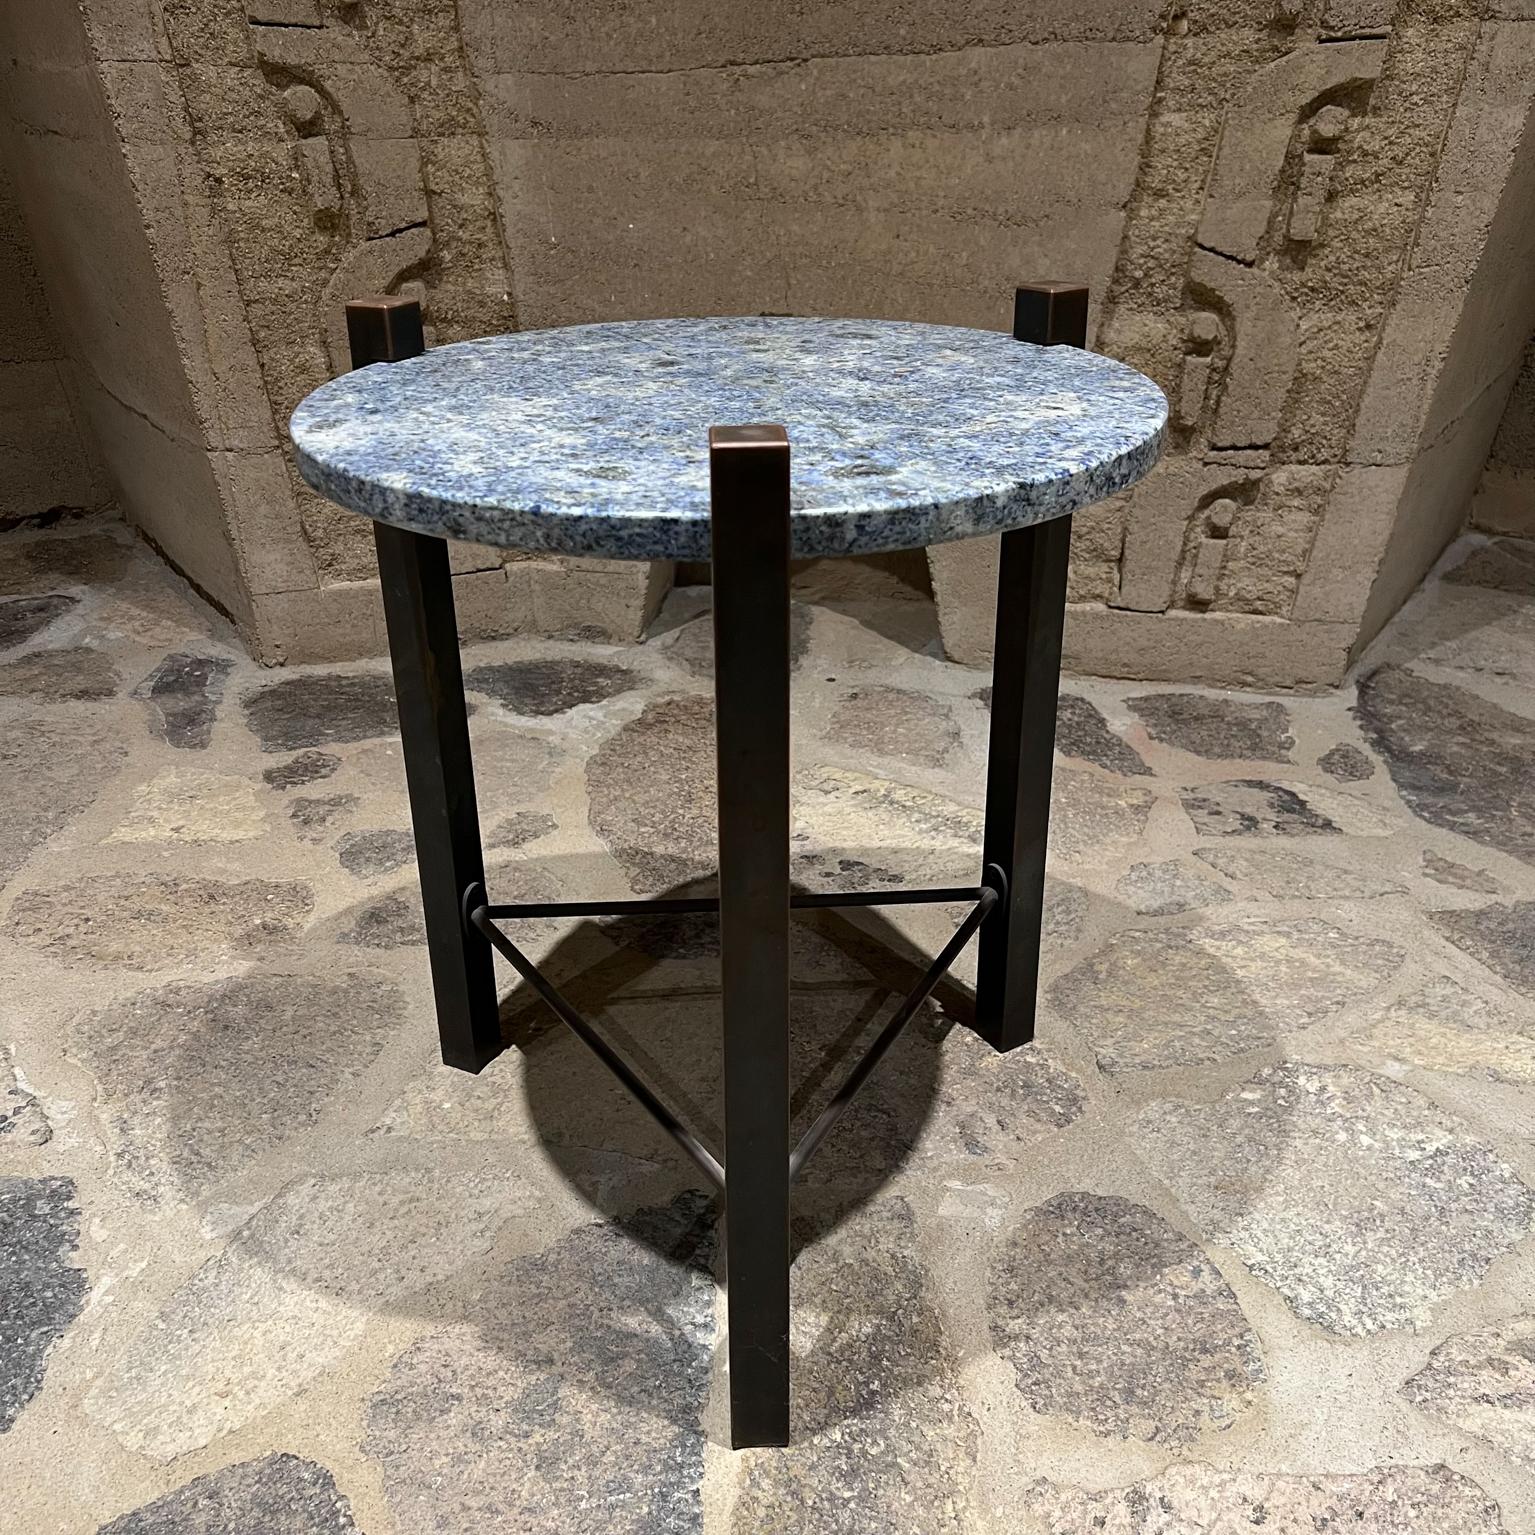 1970s Side Table luscious blue marble granite on a richly patinated bronze frame 
Modern design clean lines 
Solid bronze frame with a round stone top.
No label. In the style of artist and designer Cedric Hartman.
Measures: 18.5 diameter x 21.5